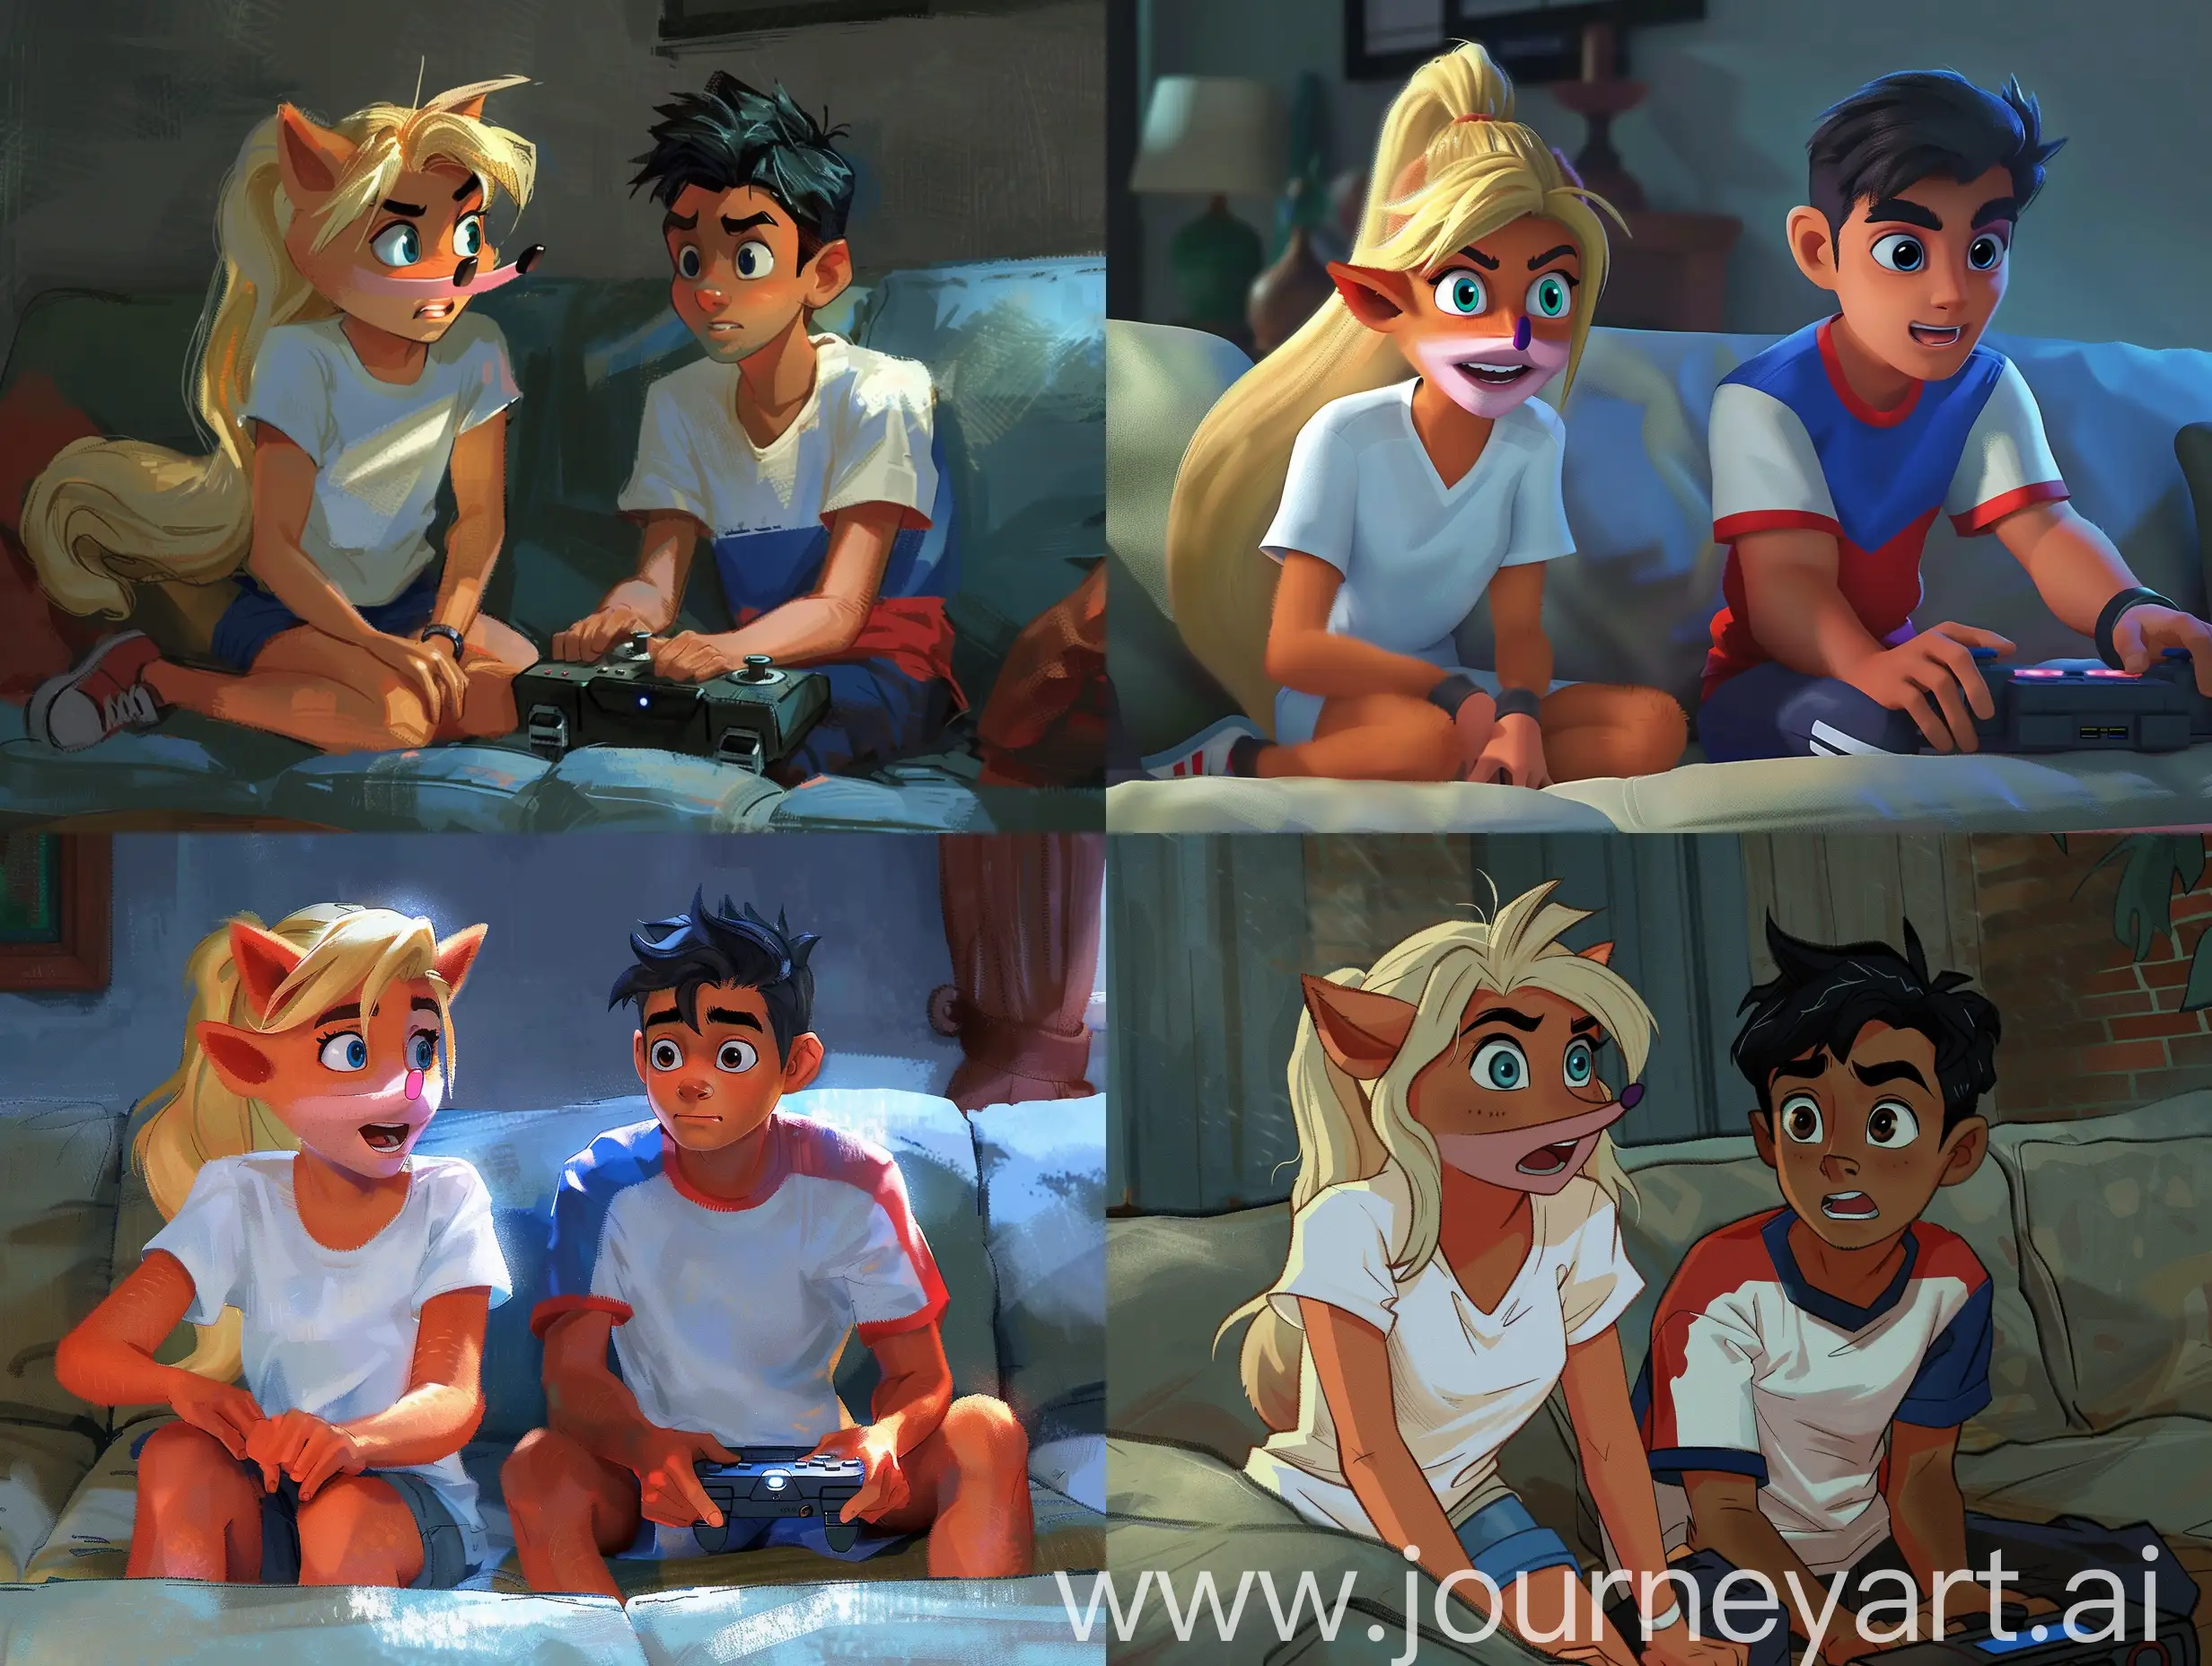 Blonde-Coco-Bandicoot-and-DarkHaired-Young-Bandicoot-Gaming-Duo-on-Couch